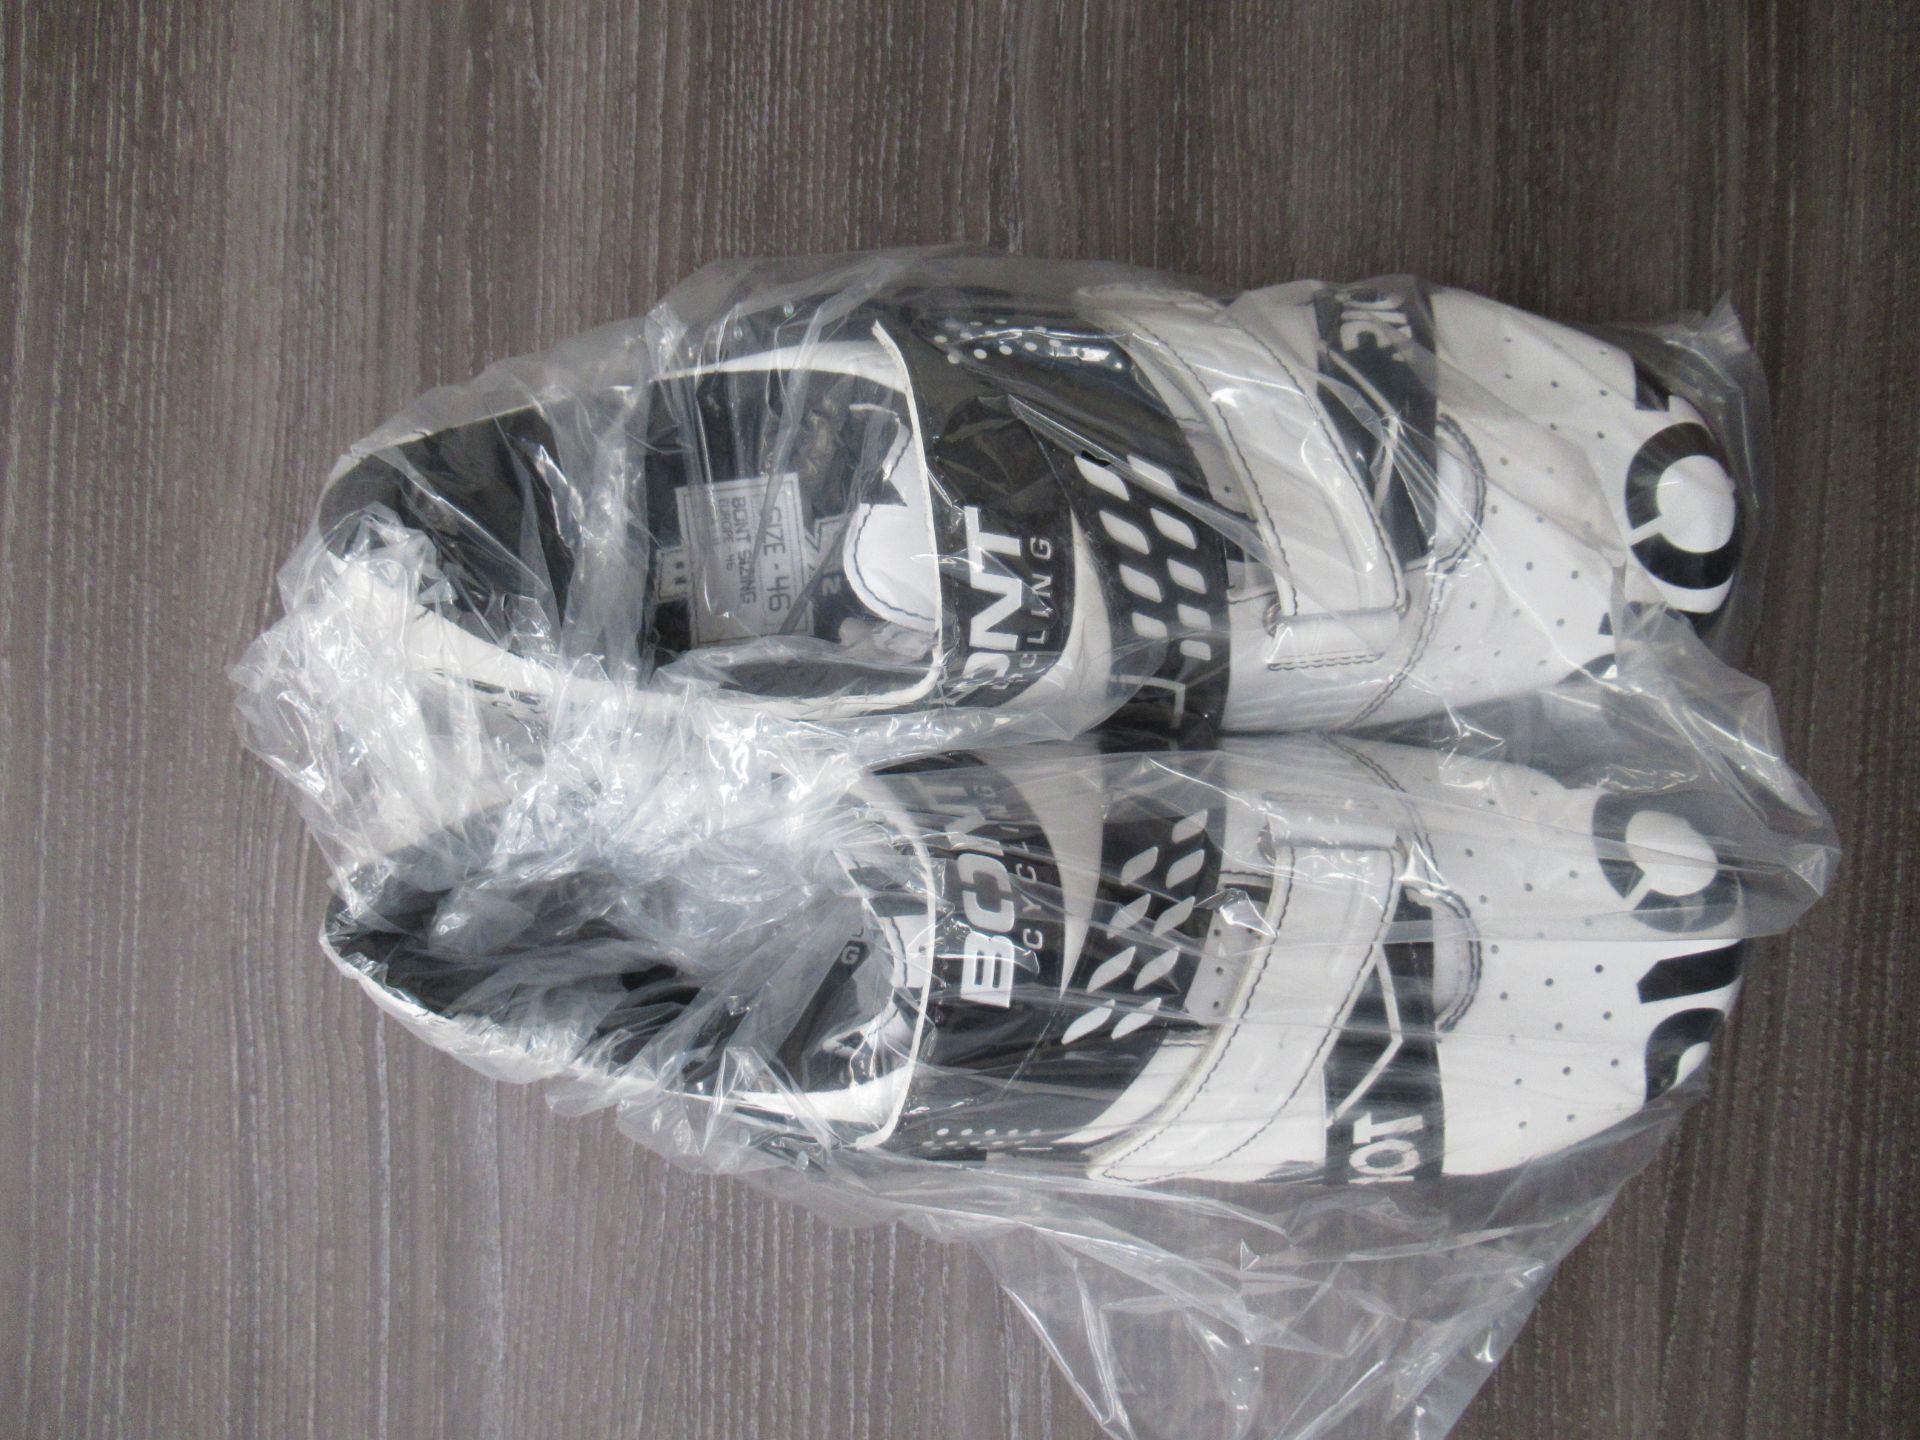 Pair of Bont Riot Buckle cycling shoes (white/black) - boxed EU size 46 (RRP£104.99)